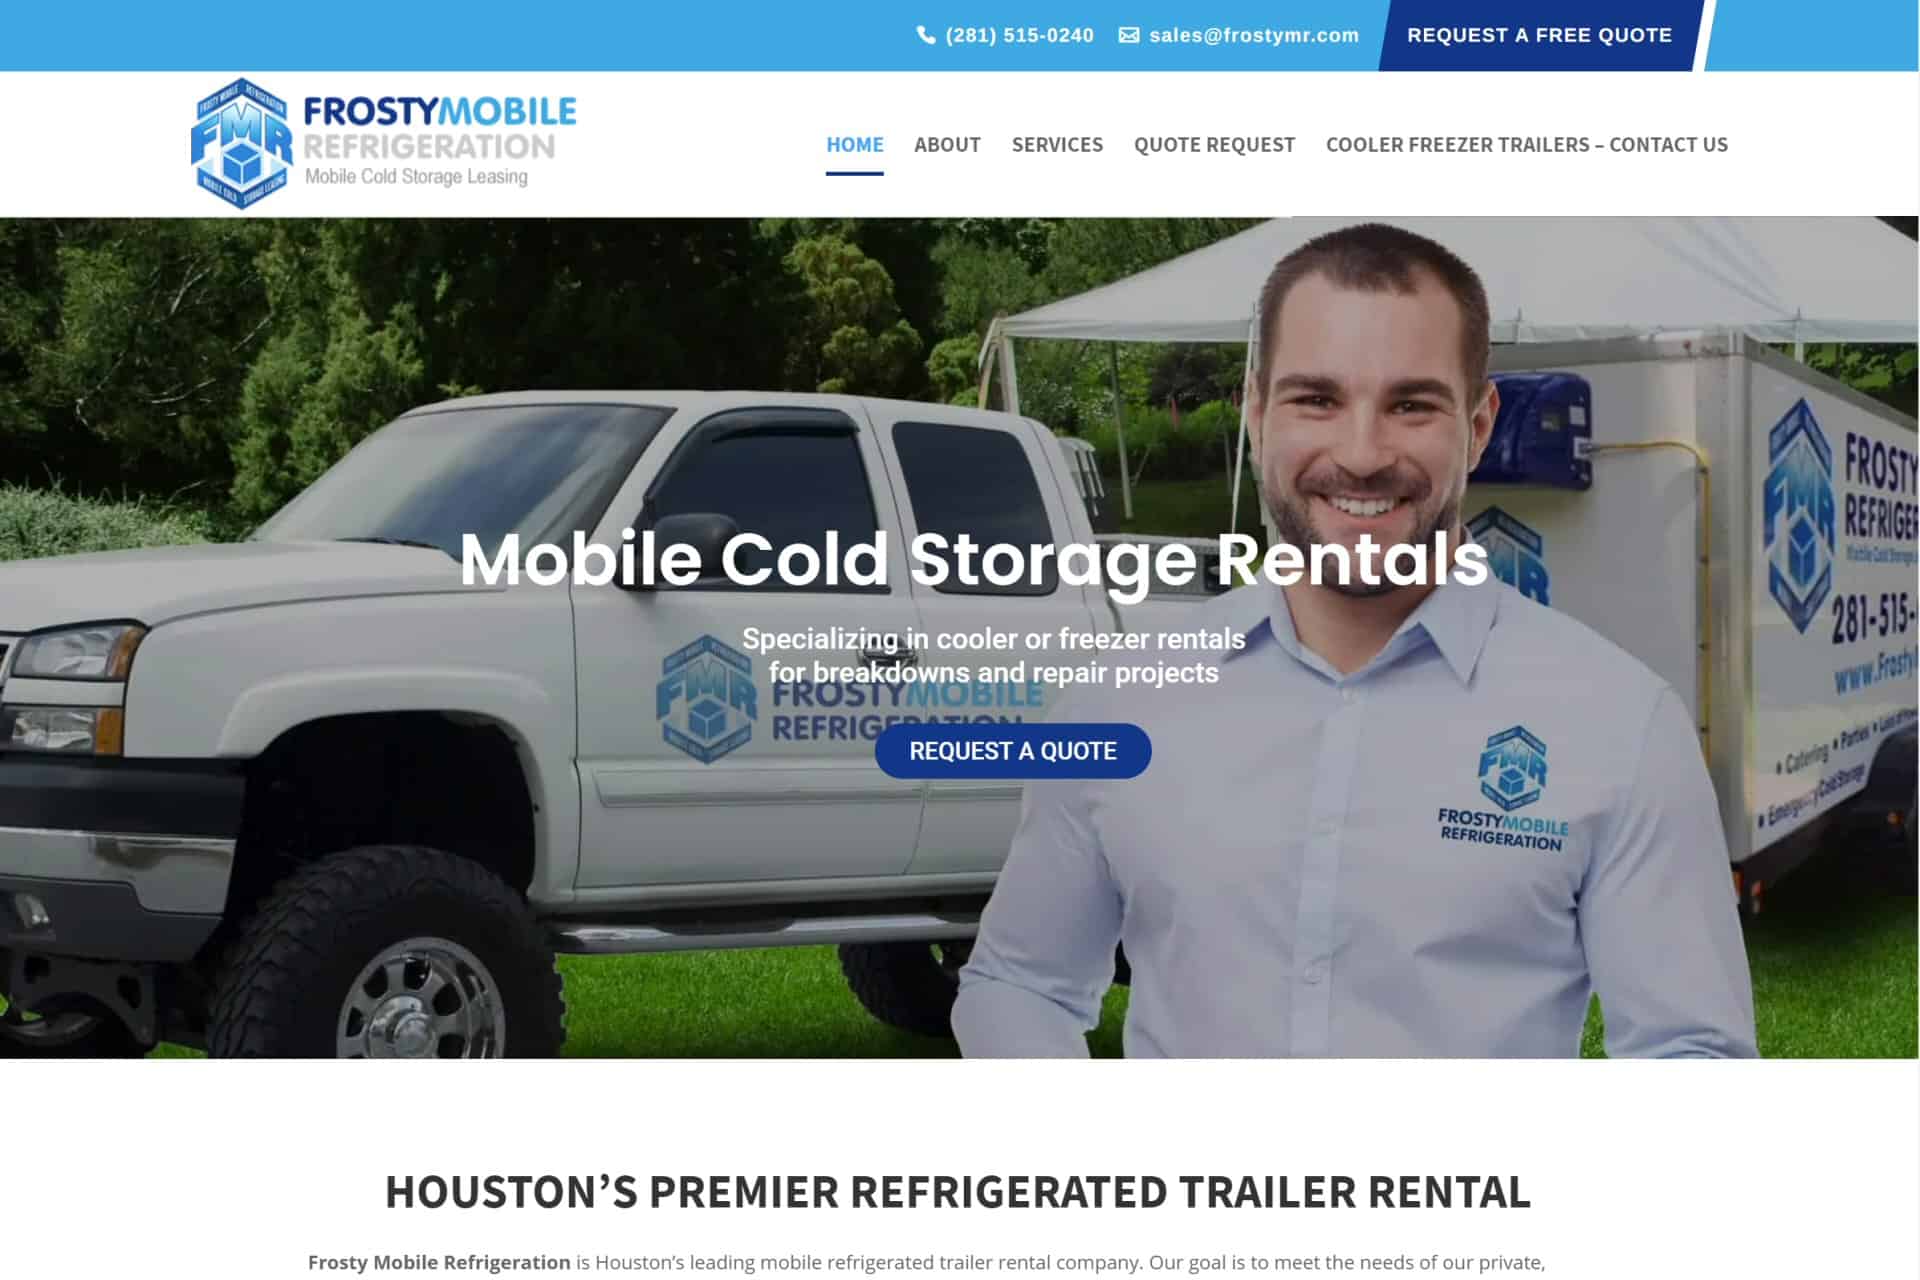 Frosty Mobile Refrigeration by All Star Pools